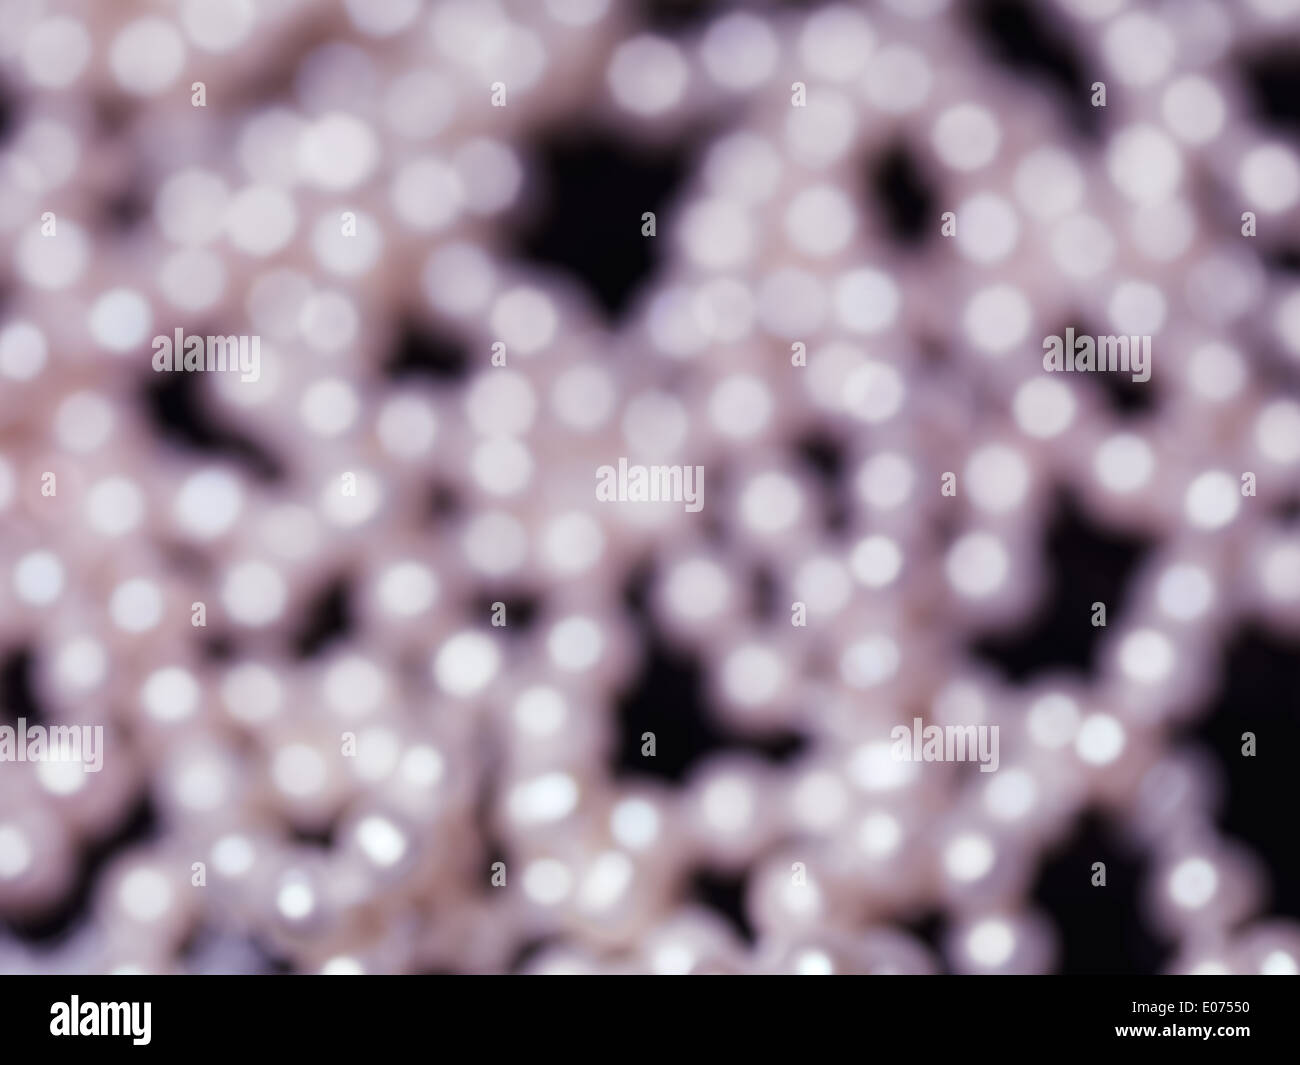 Abstract shiny blurry background texture Stock Photo